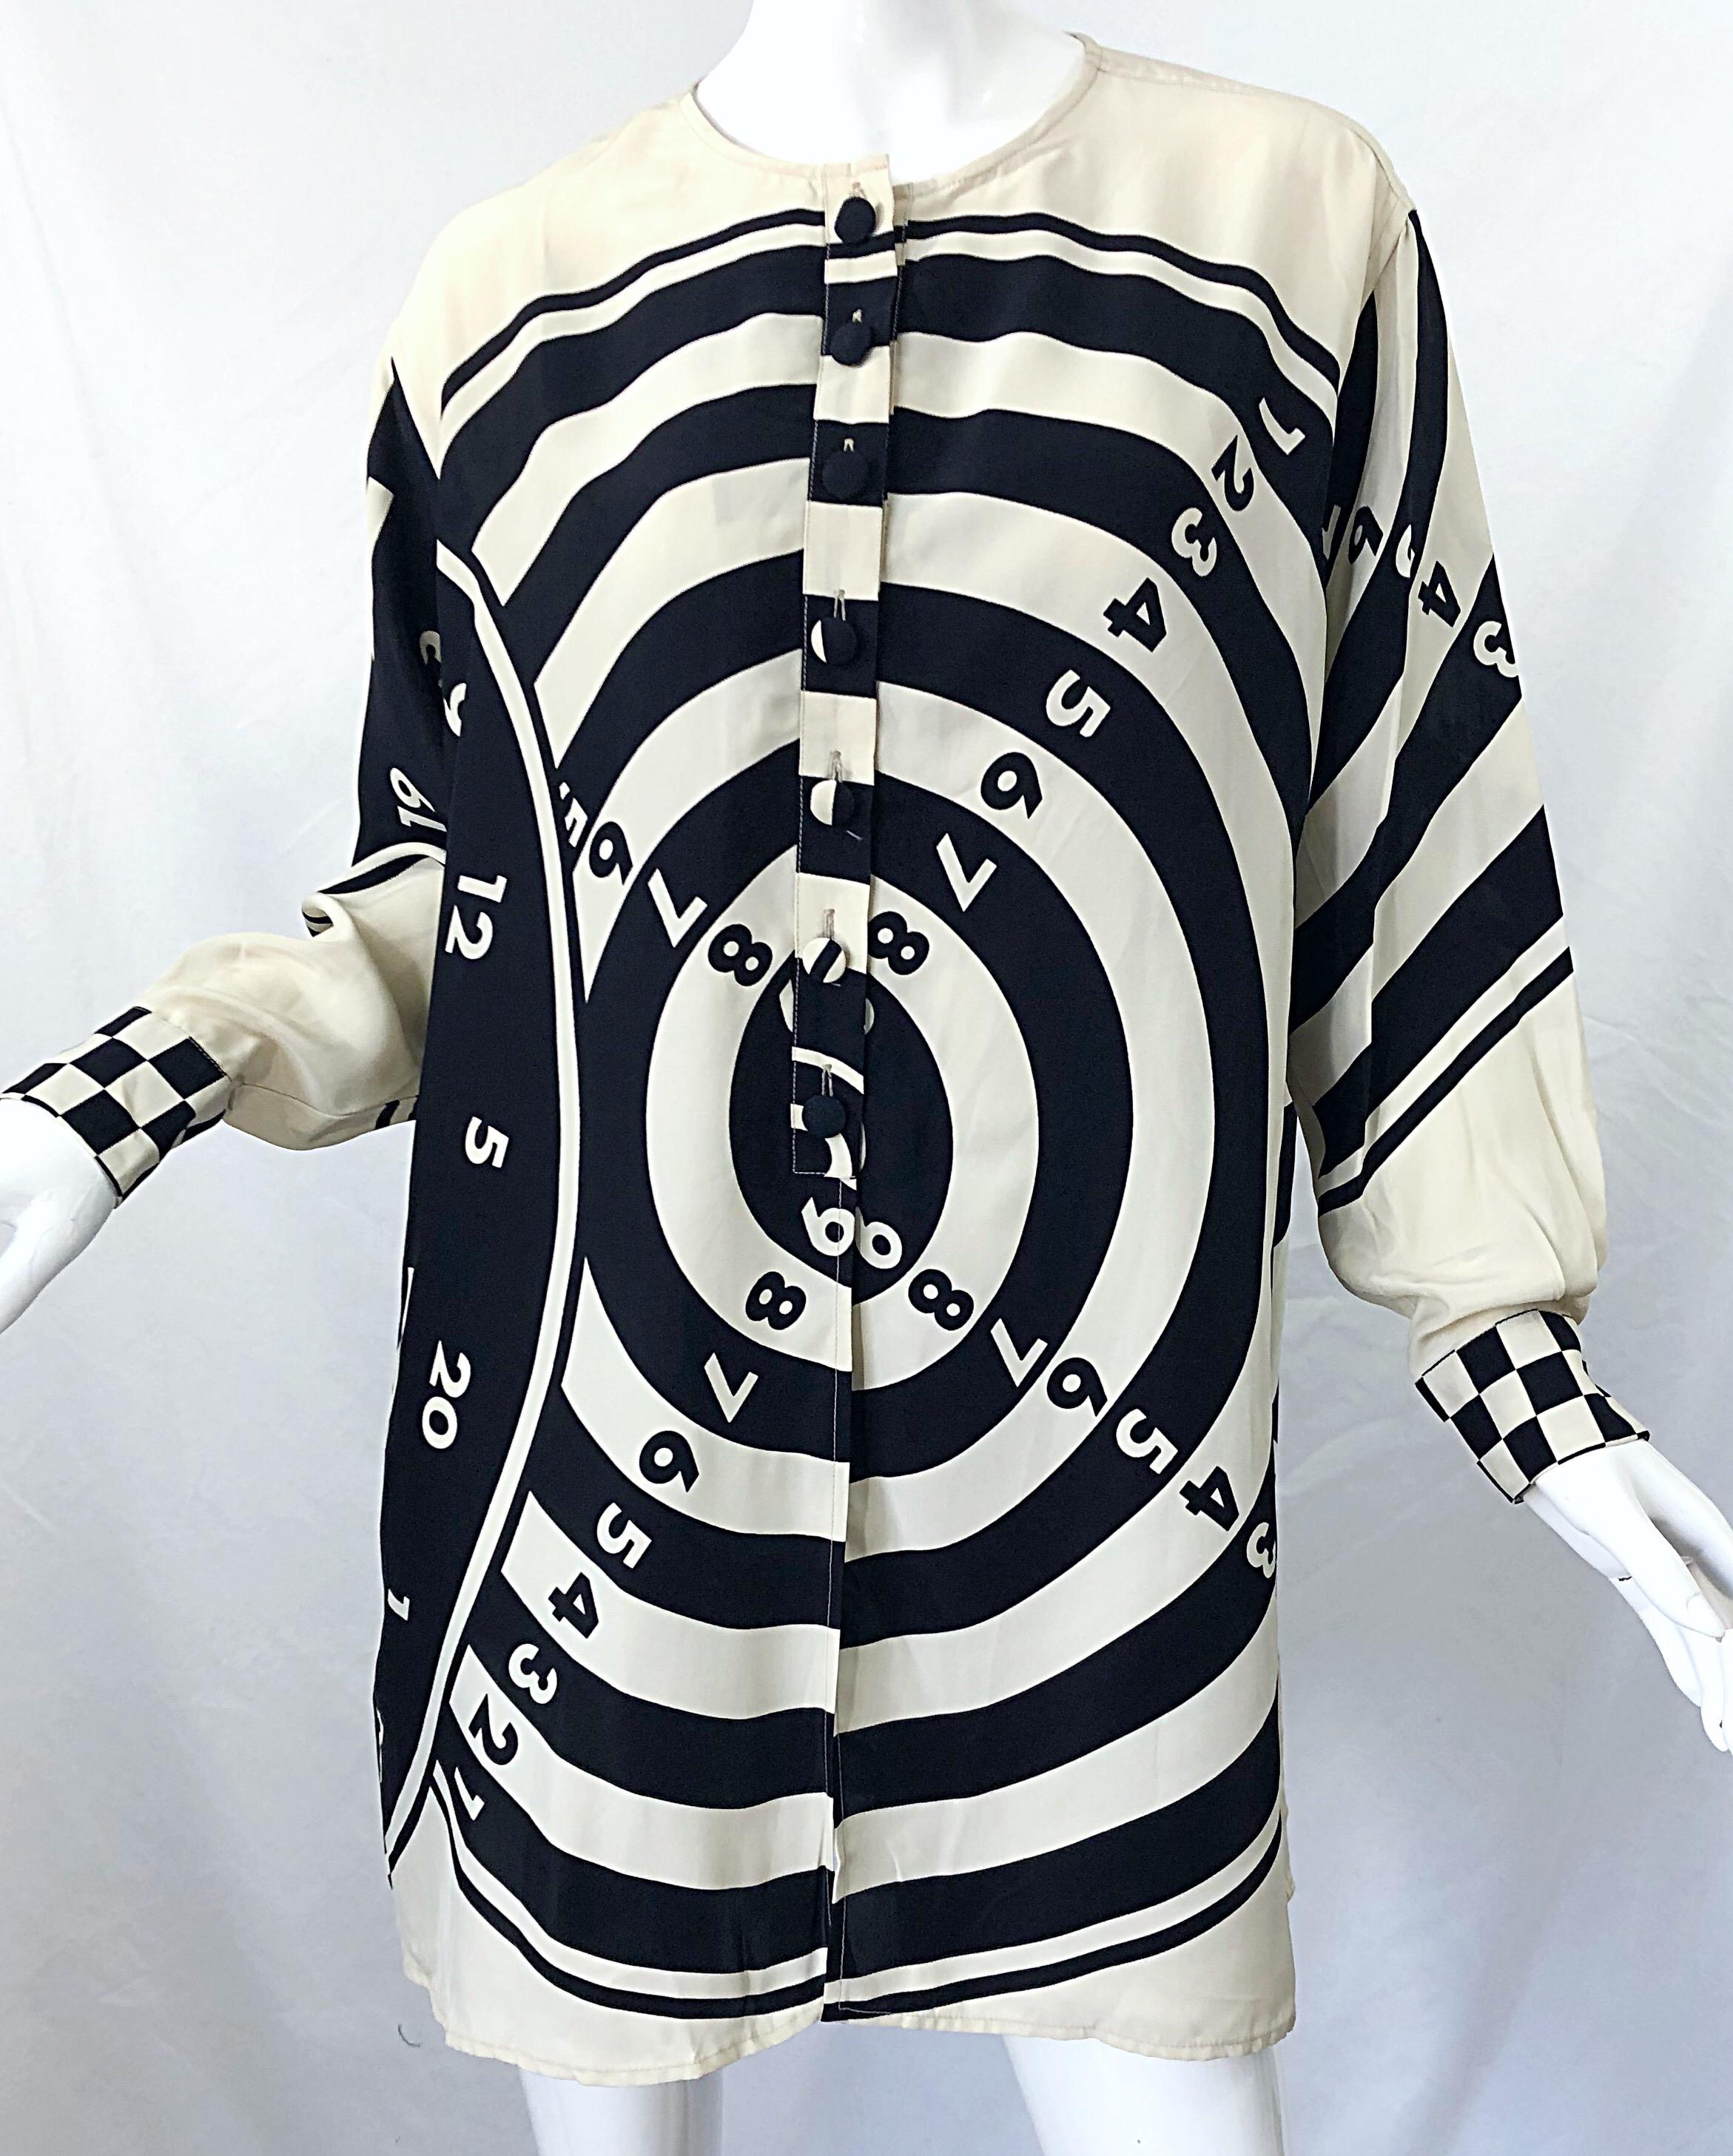 1980s Moschino Cheap & Chic Bullseye Black and White Size 8 Vintage Tunic Dress For Sale 3